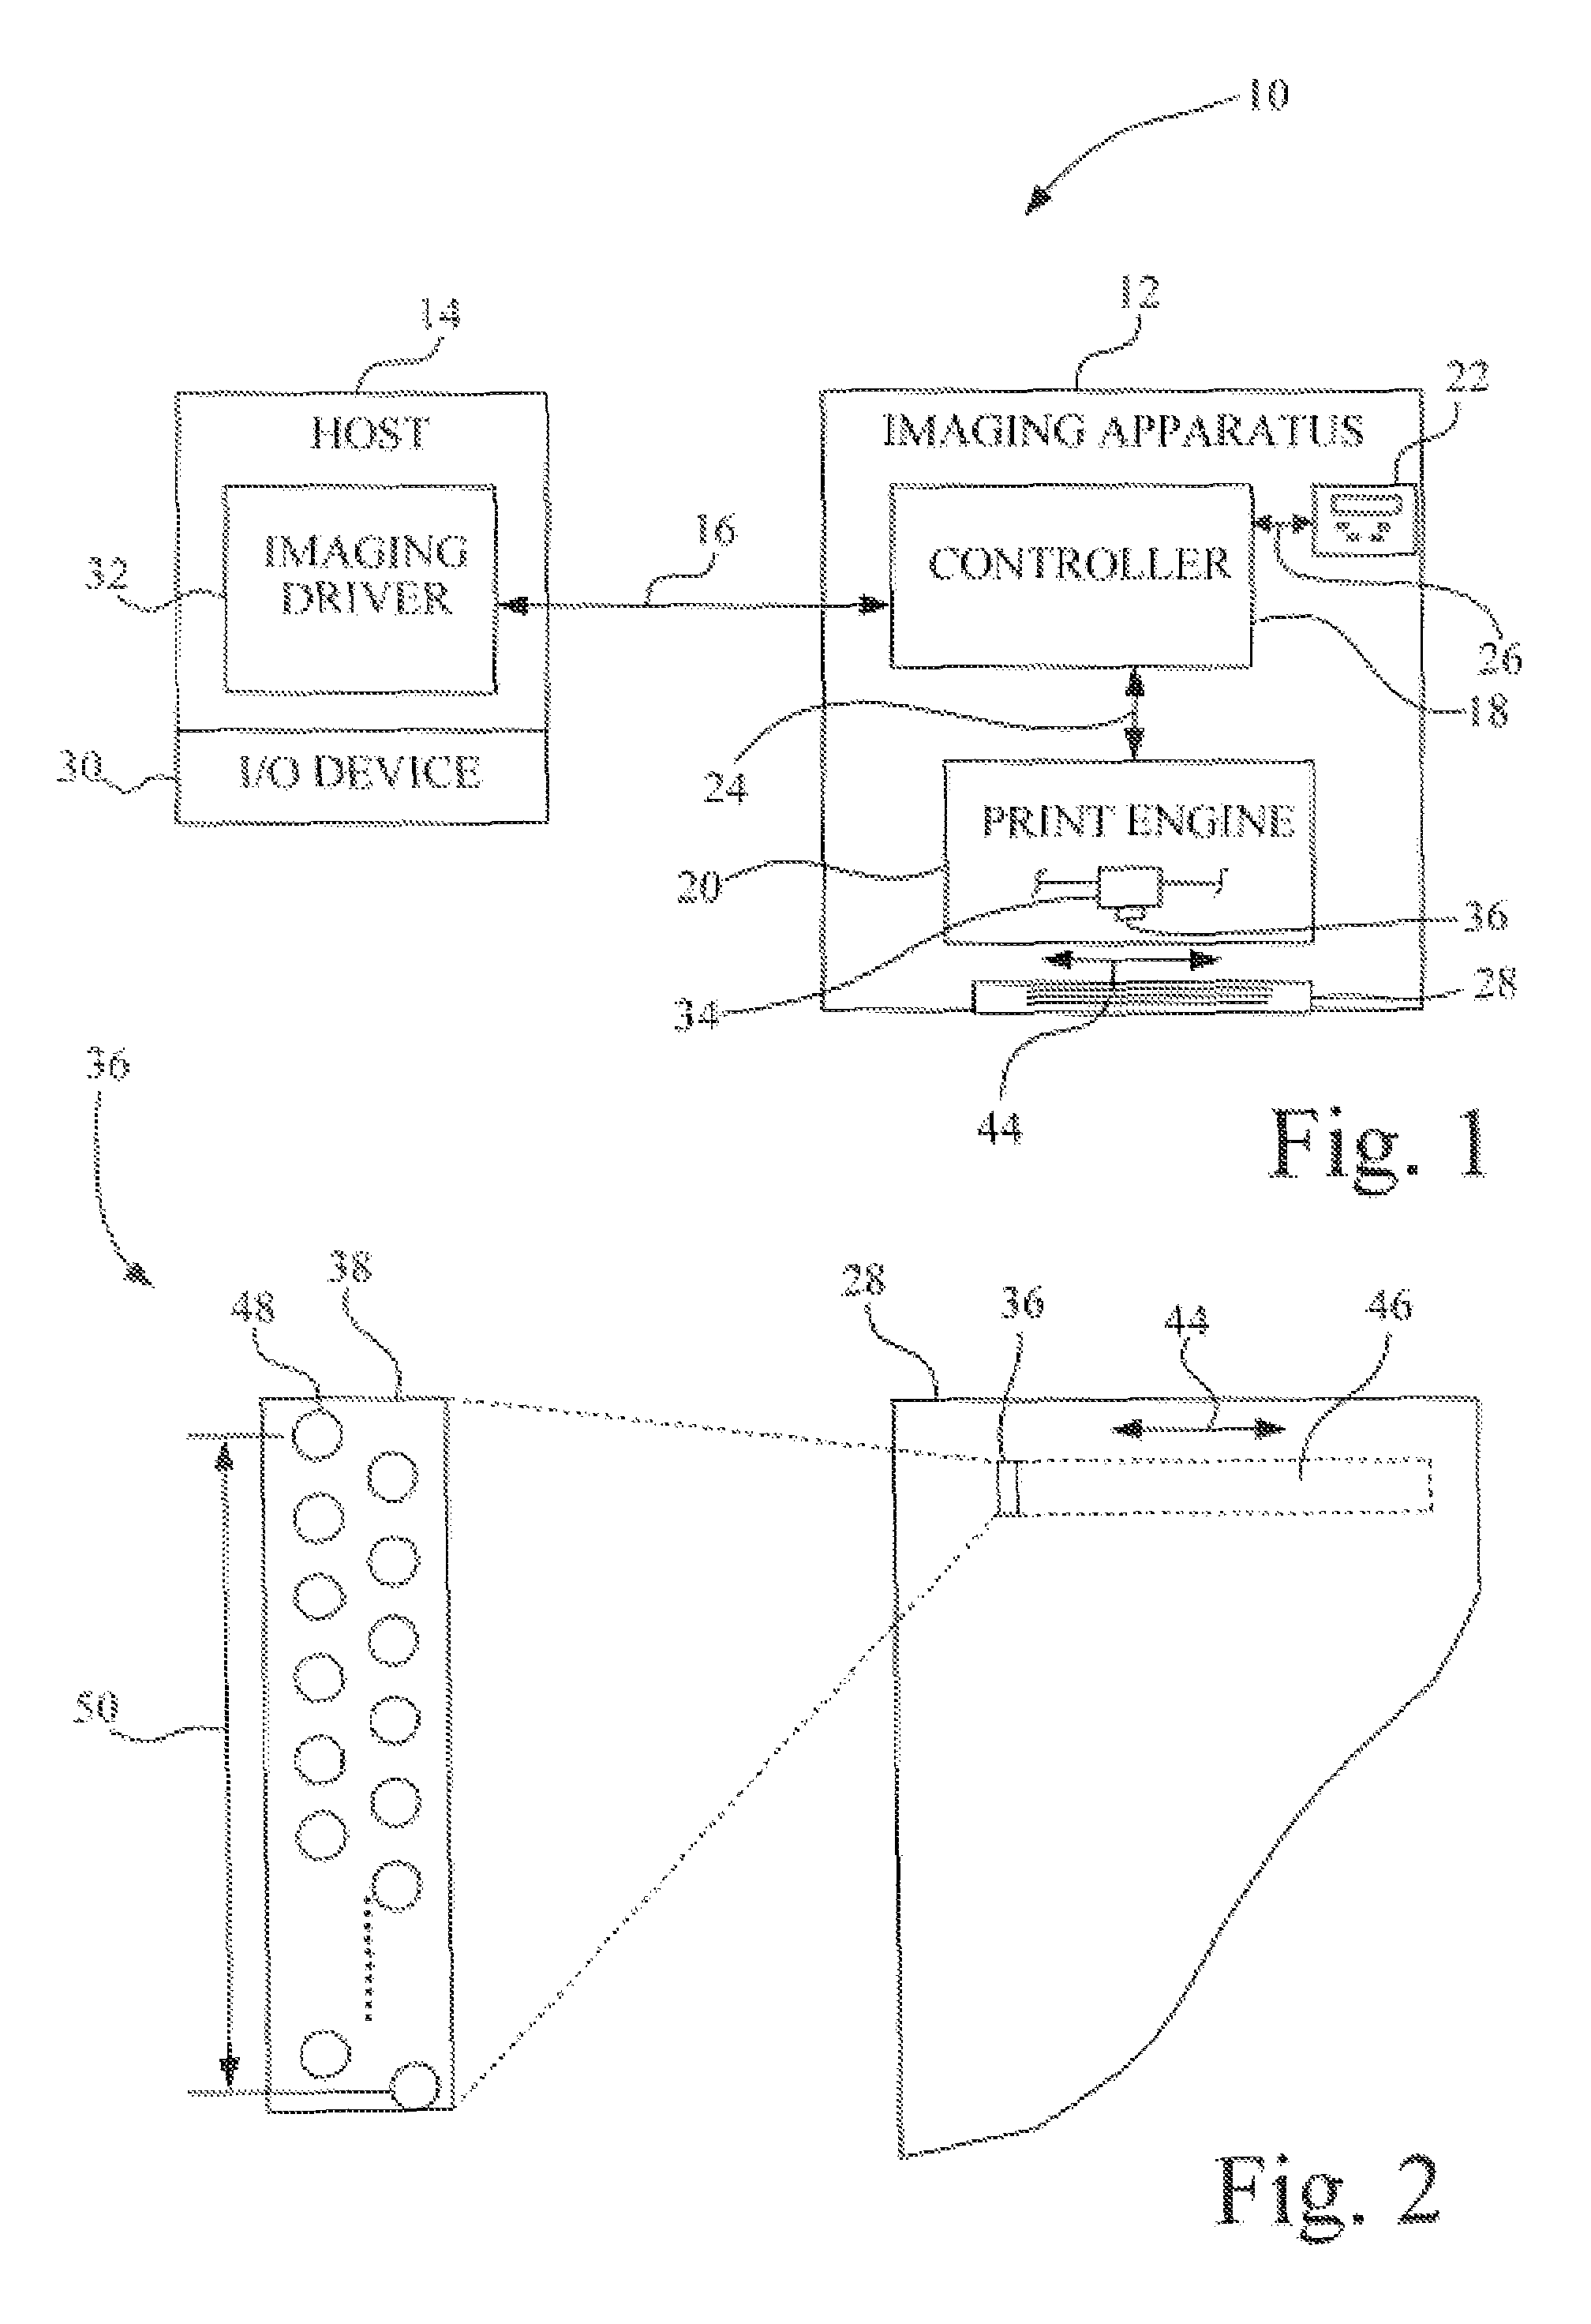 Method of multipass printing using a plurality of halftone patterns of dots